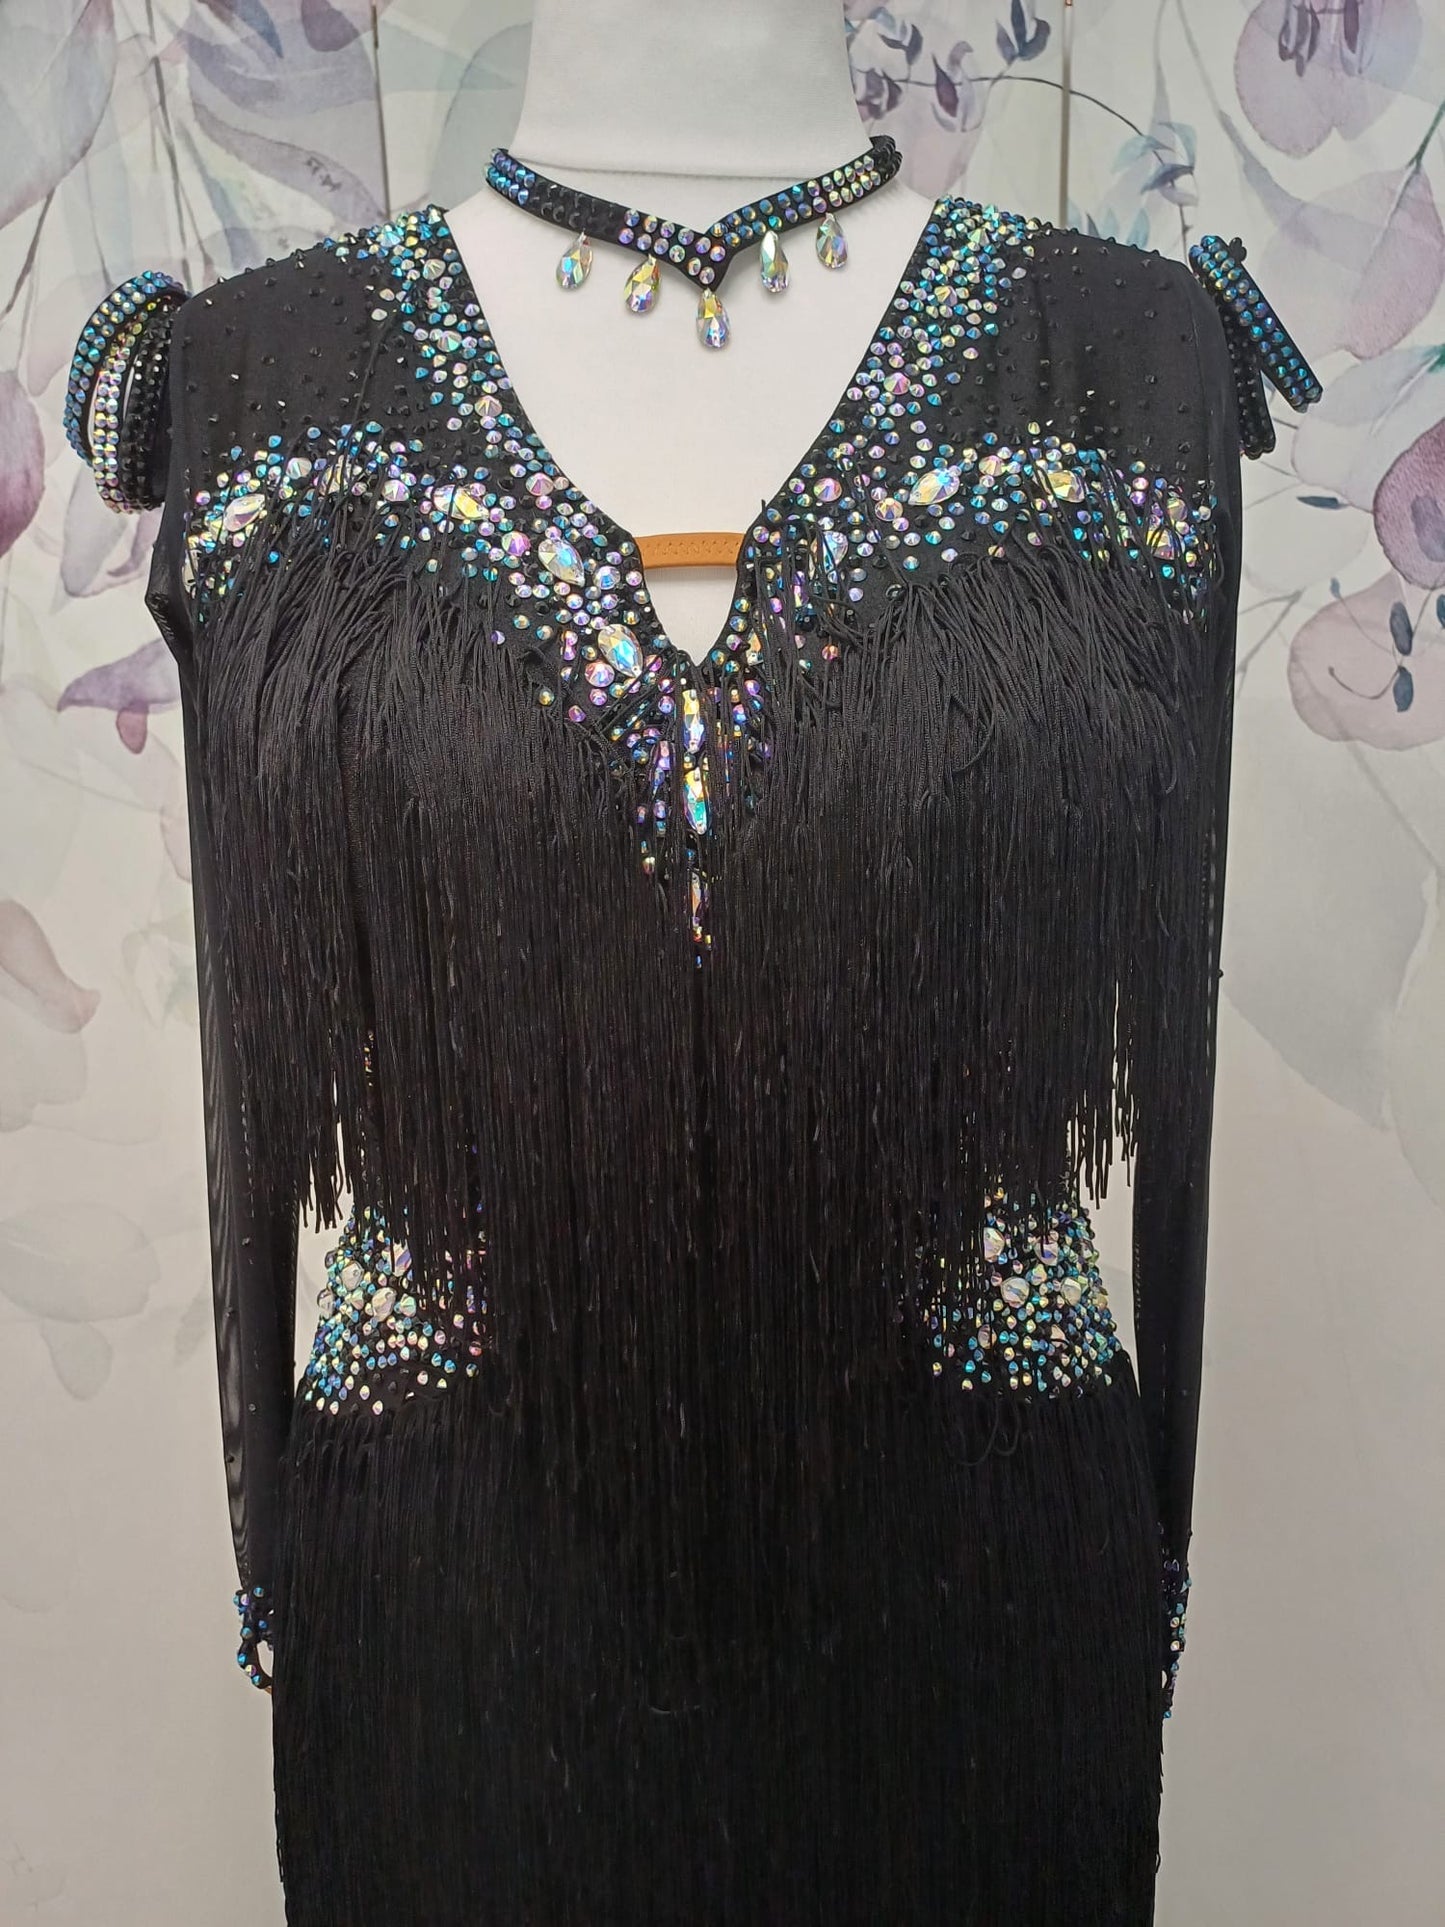 00111 Stand out stunning black fringed Latin Dance Dress. Full fringe giving maximum movement on the floor. Stoned in Jet, AB & Sapphire ab. High back to give option of wearing own bra.